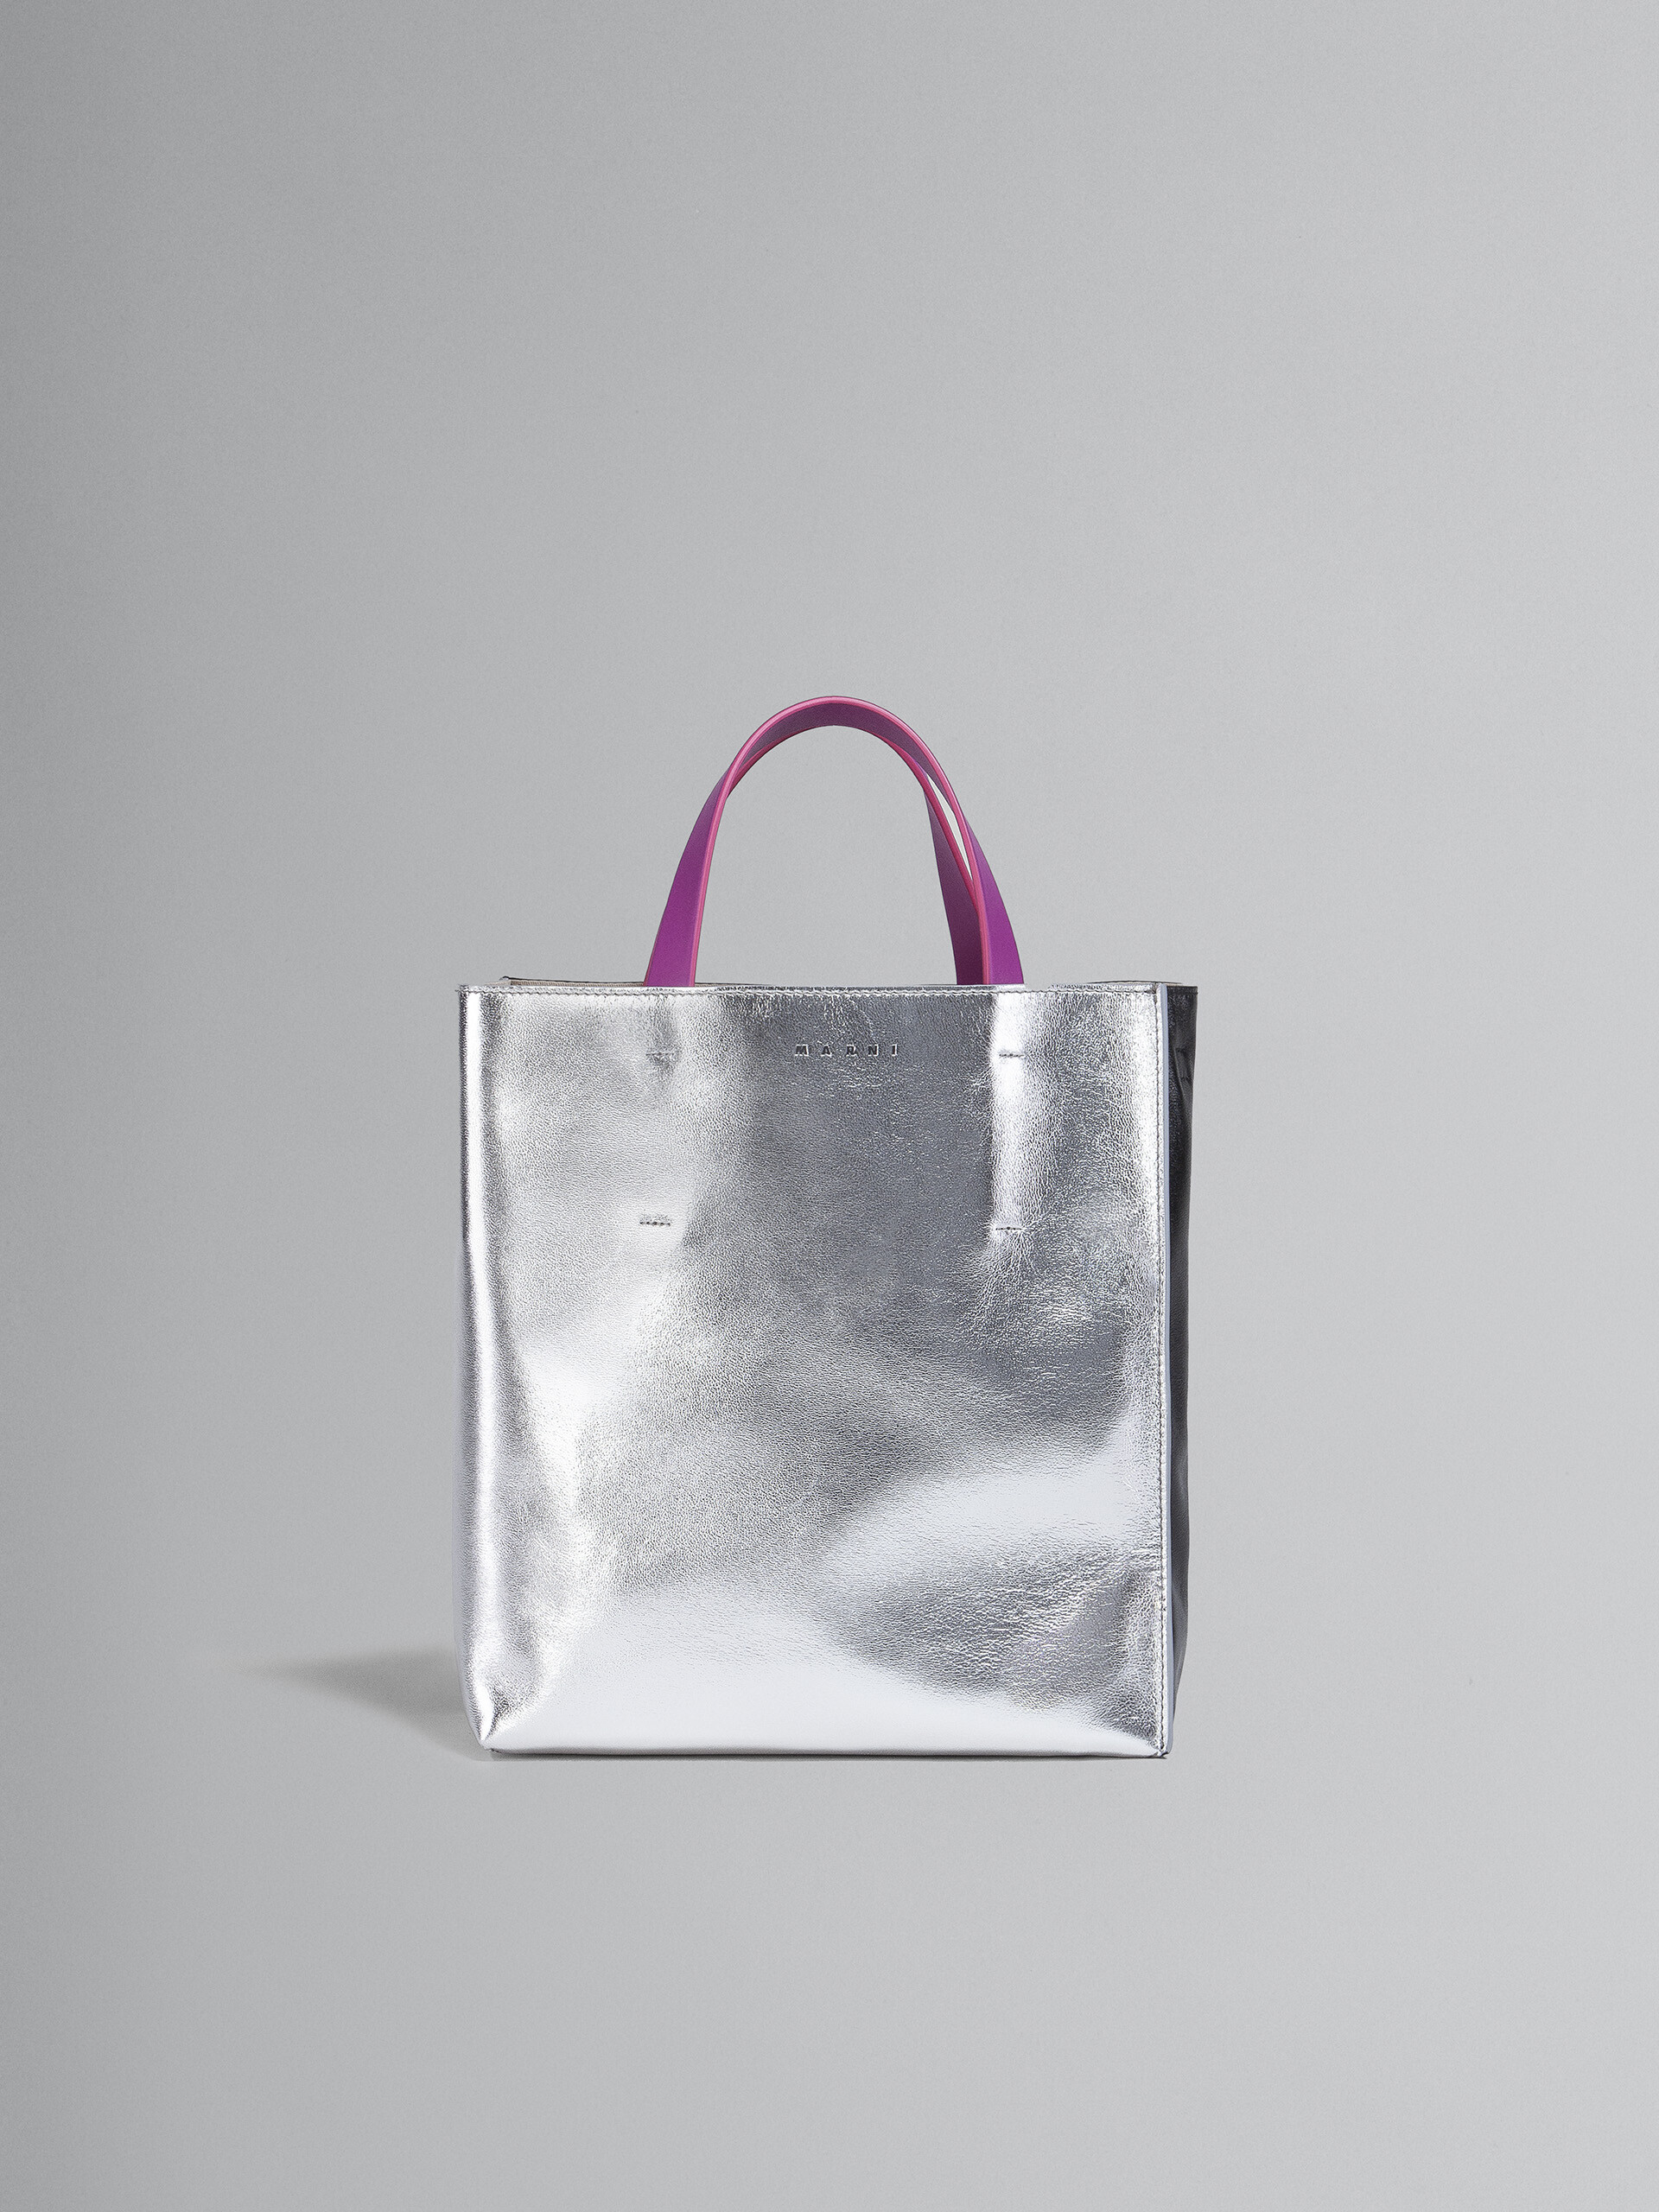 MUSEO SOFT small bag in silver and black metallic leather - Shopping Bags - Image 1